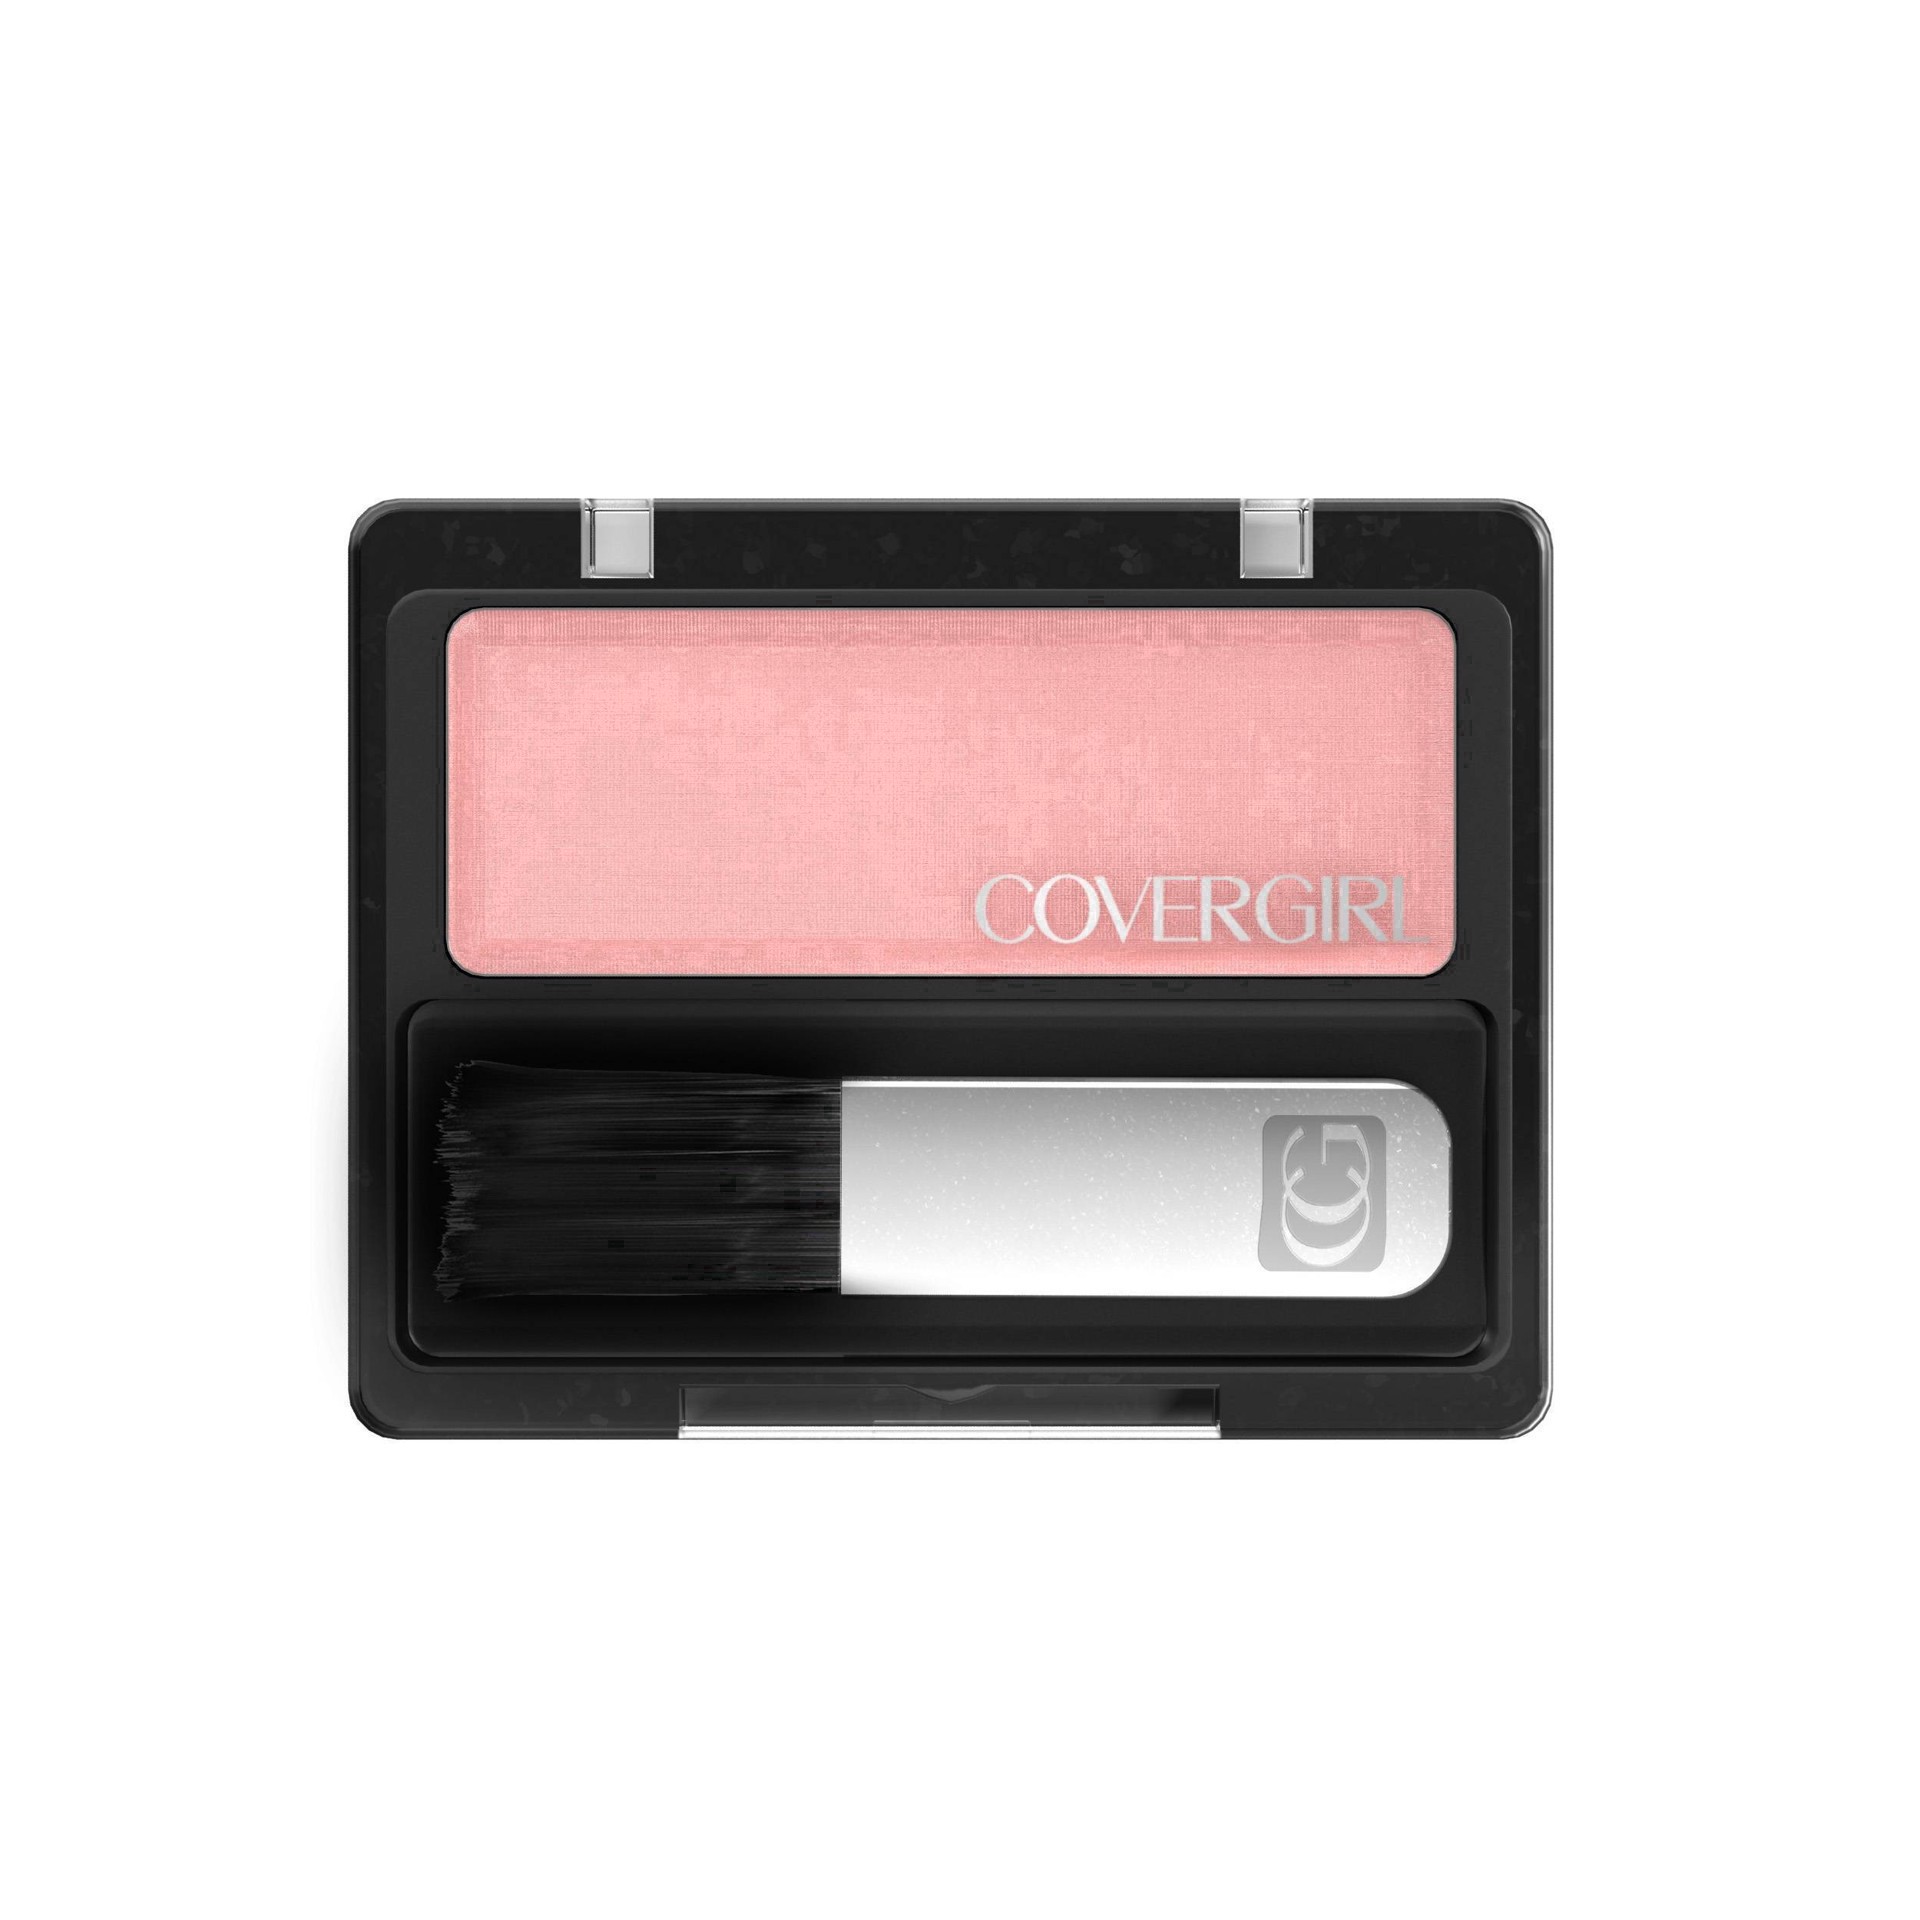 slide 29 of 42, Covergirl COVERGIRL Classic Color Blush Rose Silk, 1 ct